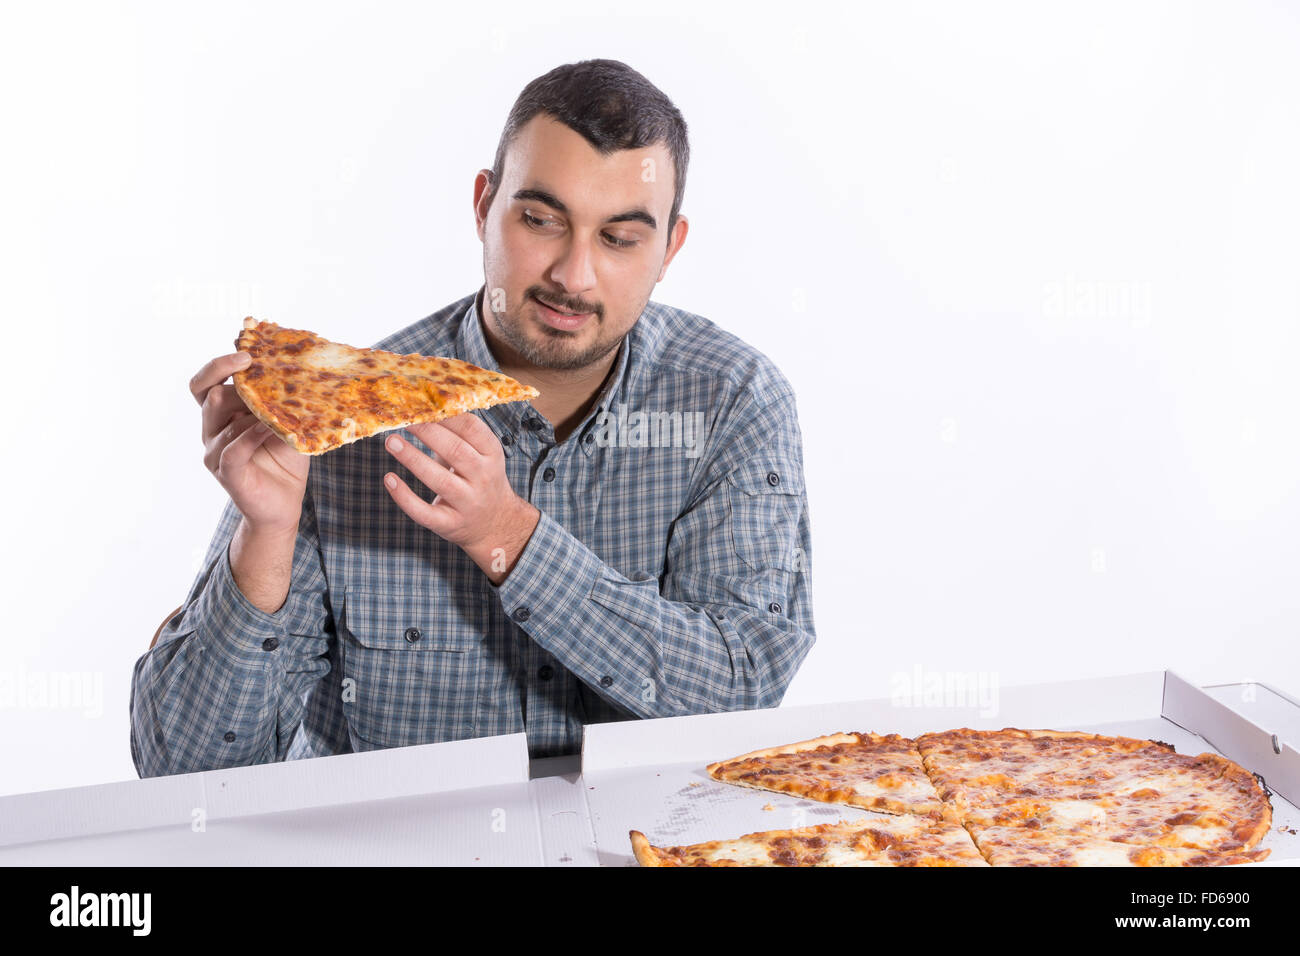 Young man eating pizza with cheese on a white background Stock Photo